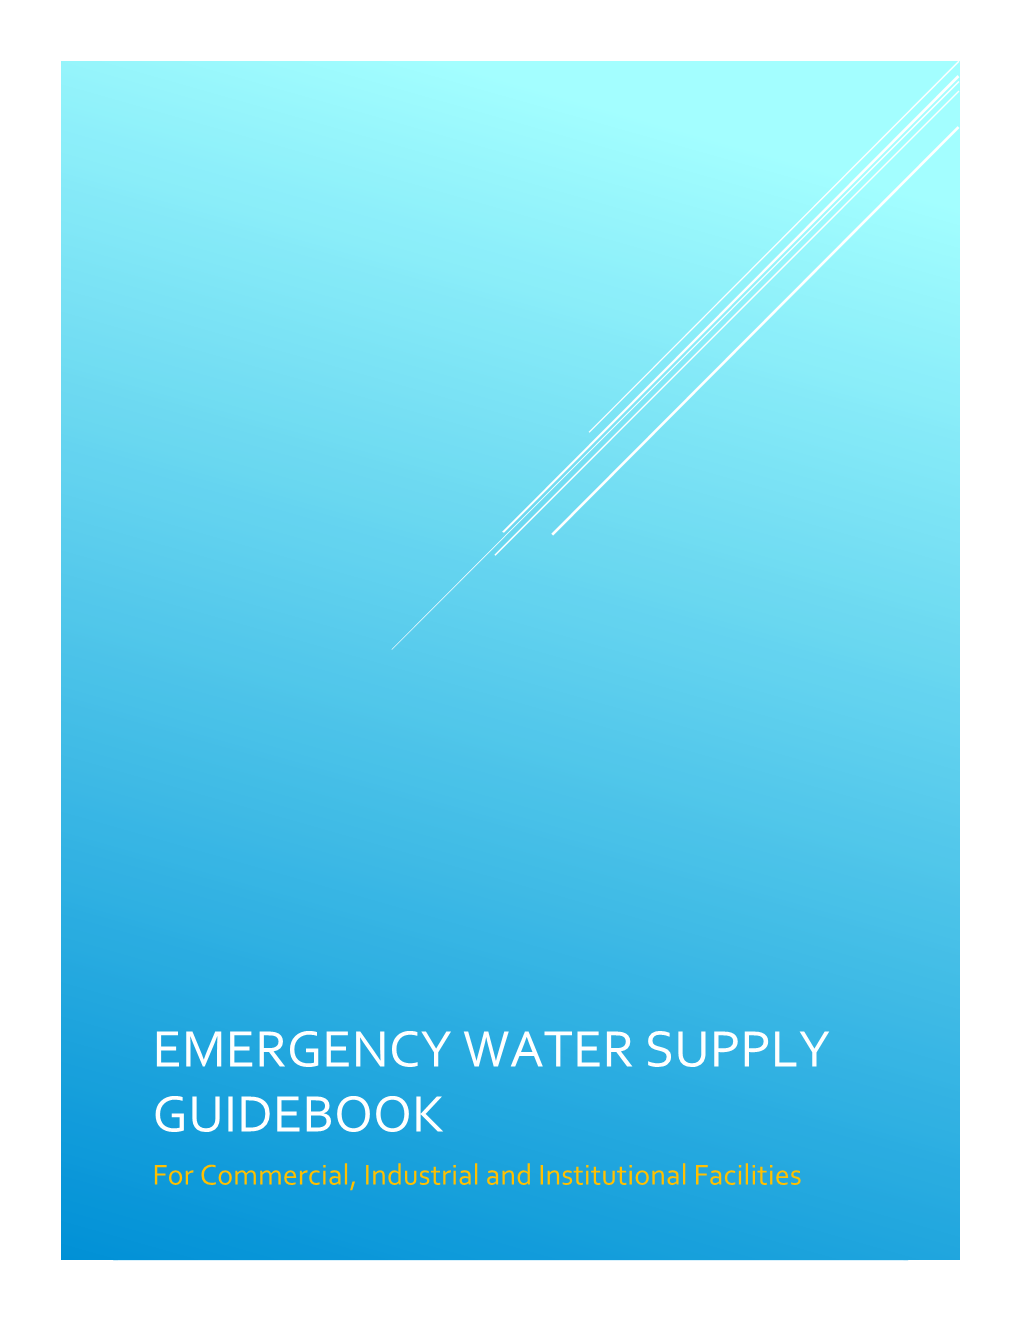 EMERGENCY WATER SUPPLY GUIDEBOOK for Commercial, Industrial and Institutional Facilities